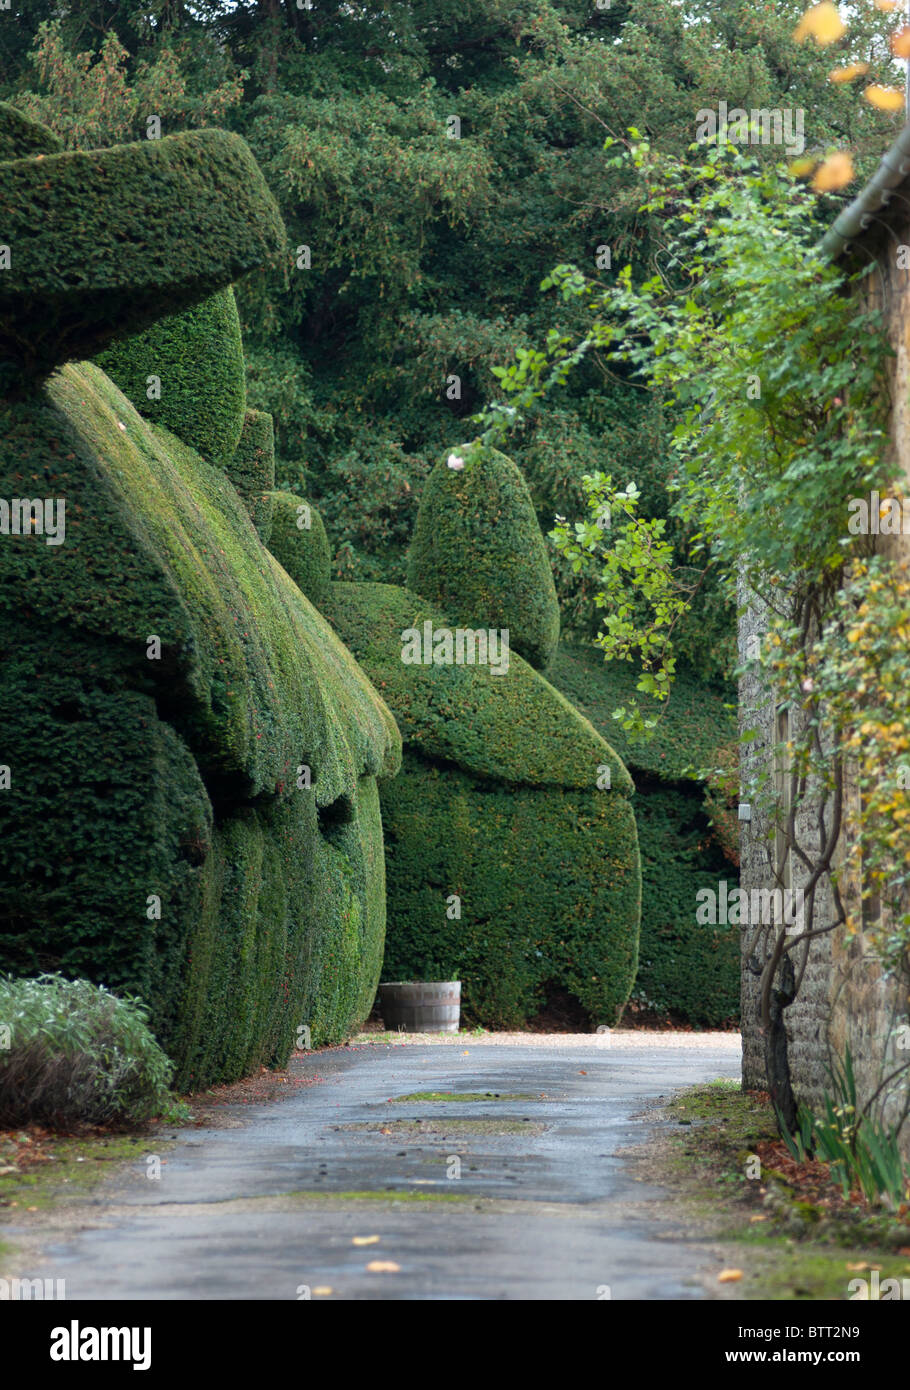 Interesting hedgerow seen in the Cotswold village of Broadway in Worcestershire, UK Stock Photo